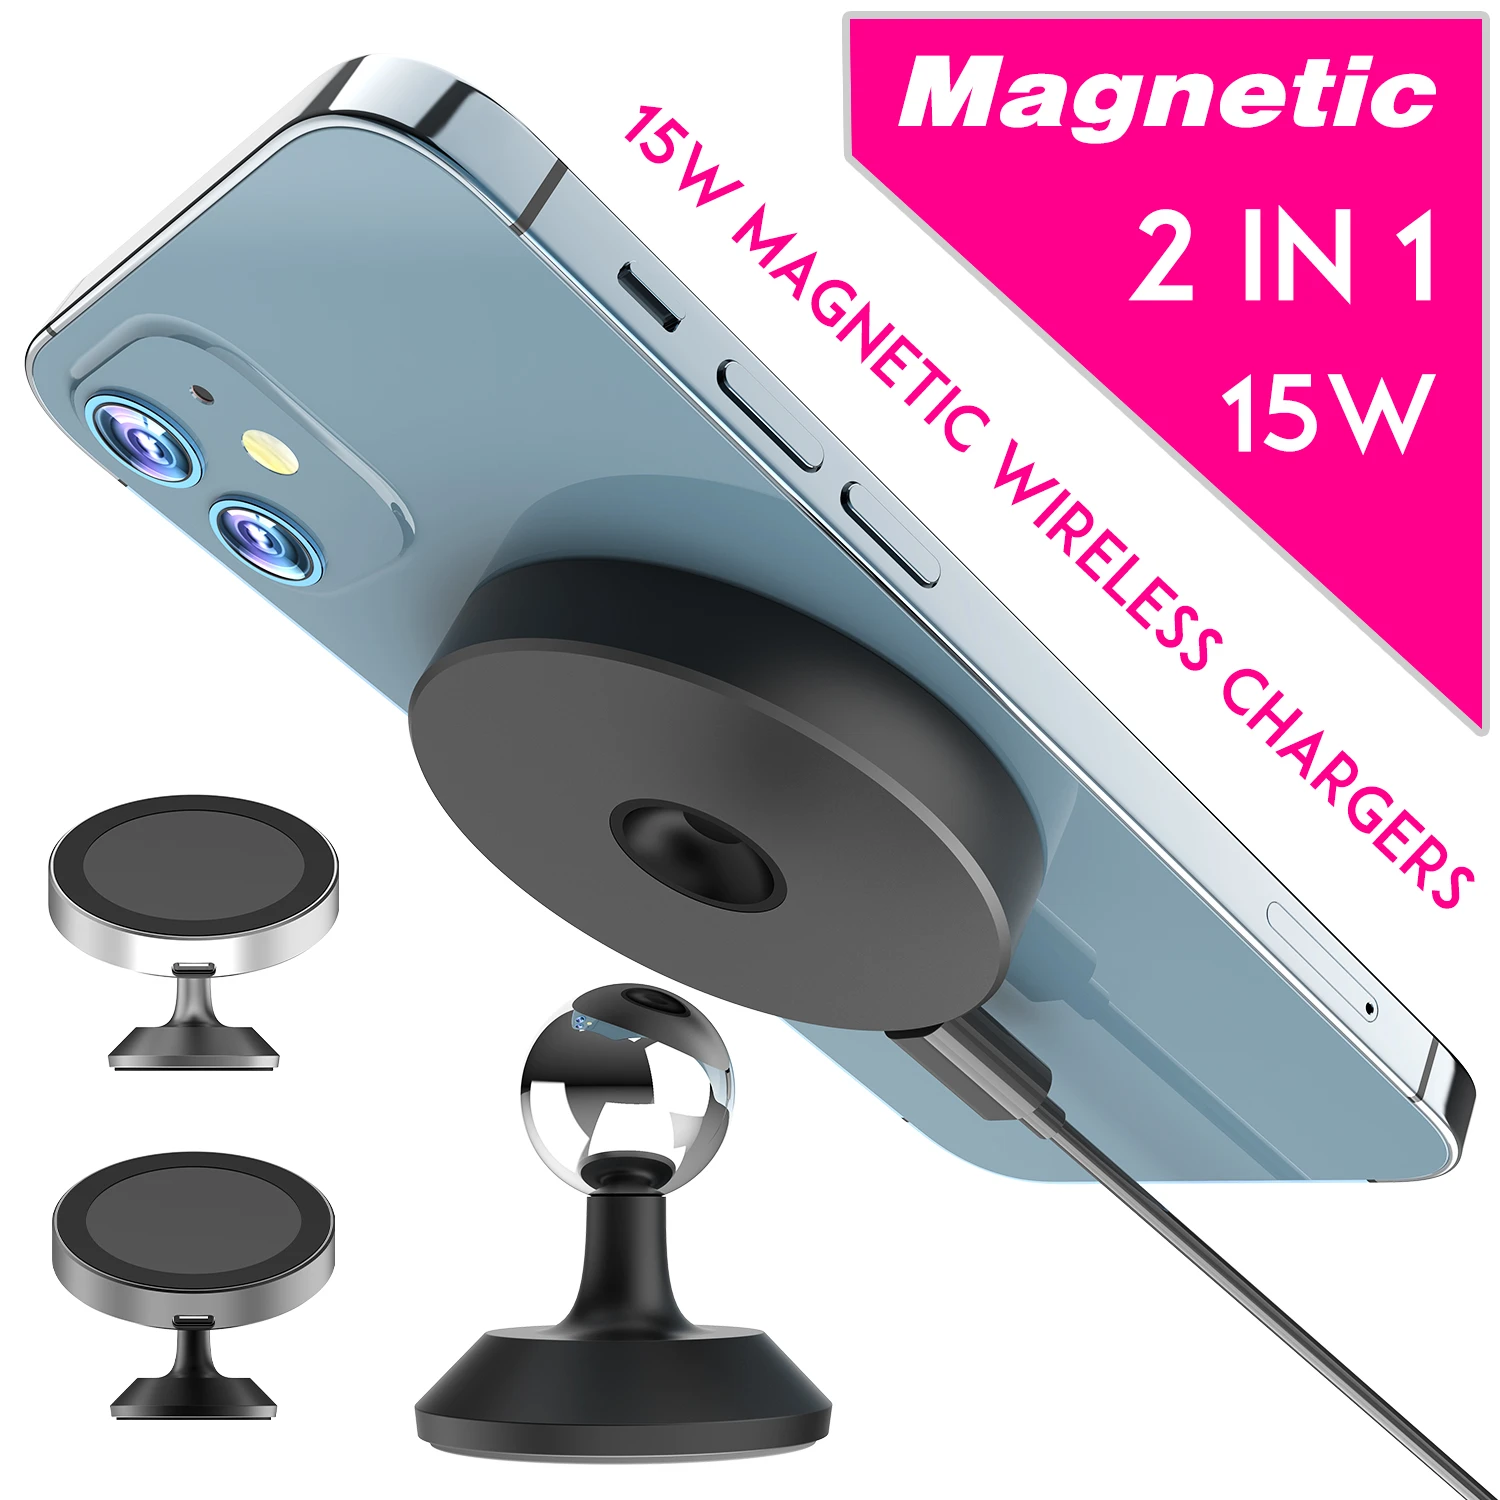 2in1 15W Magnetic Wireless Charger Qi Wireless Car Charger For mag iPhone 12 13 Pro Max Mini Samsung Huawei Xiaomi apple mag safe